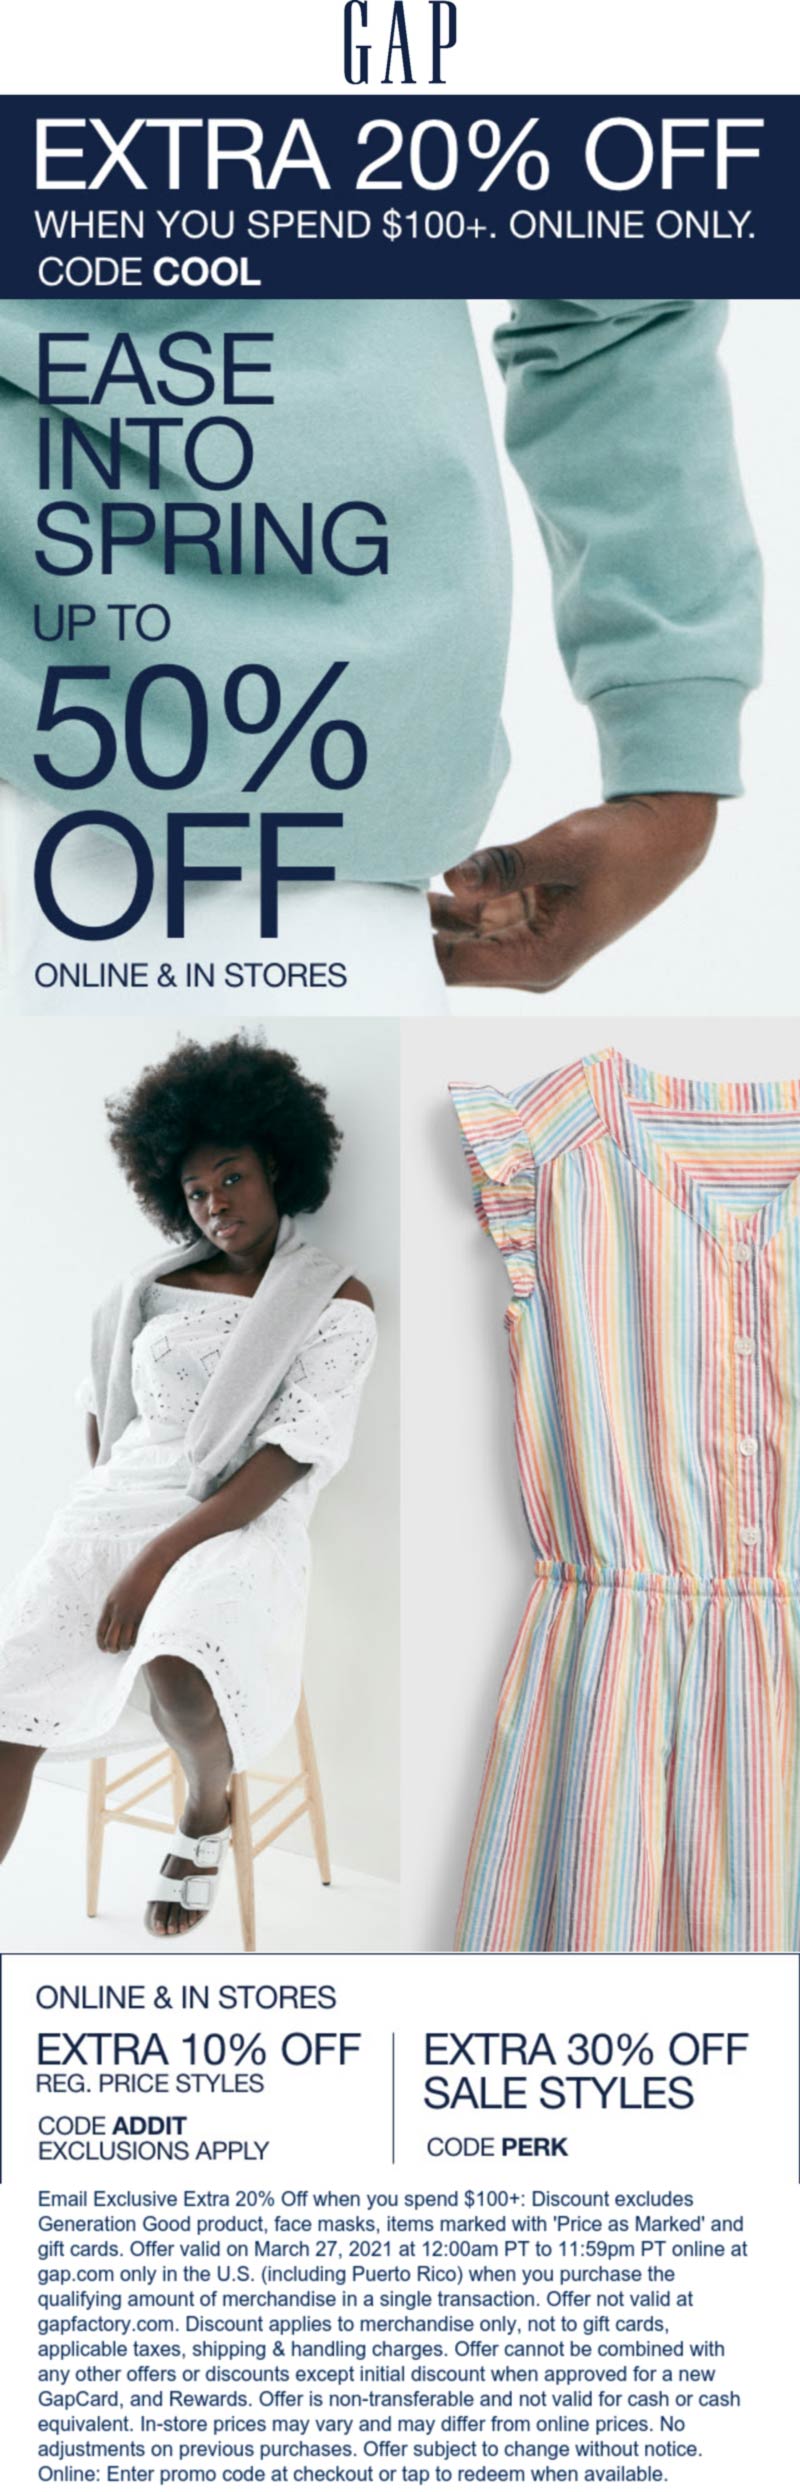 Gap stores Coupon  Extra 20% off $100 online today at Gap via promo code COOL #gap 